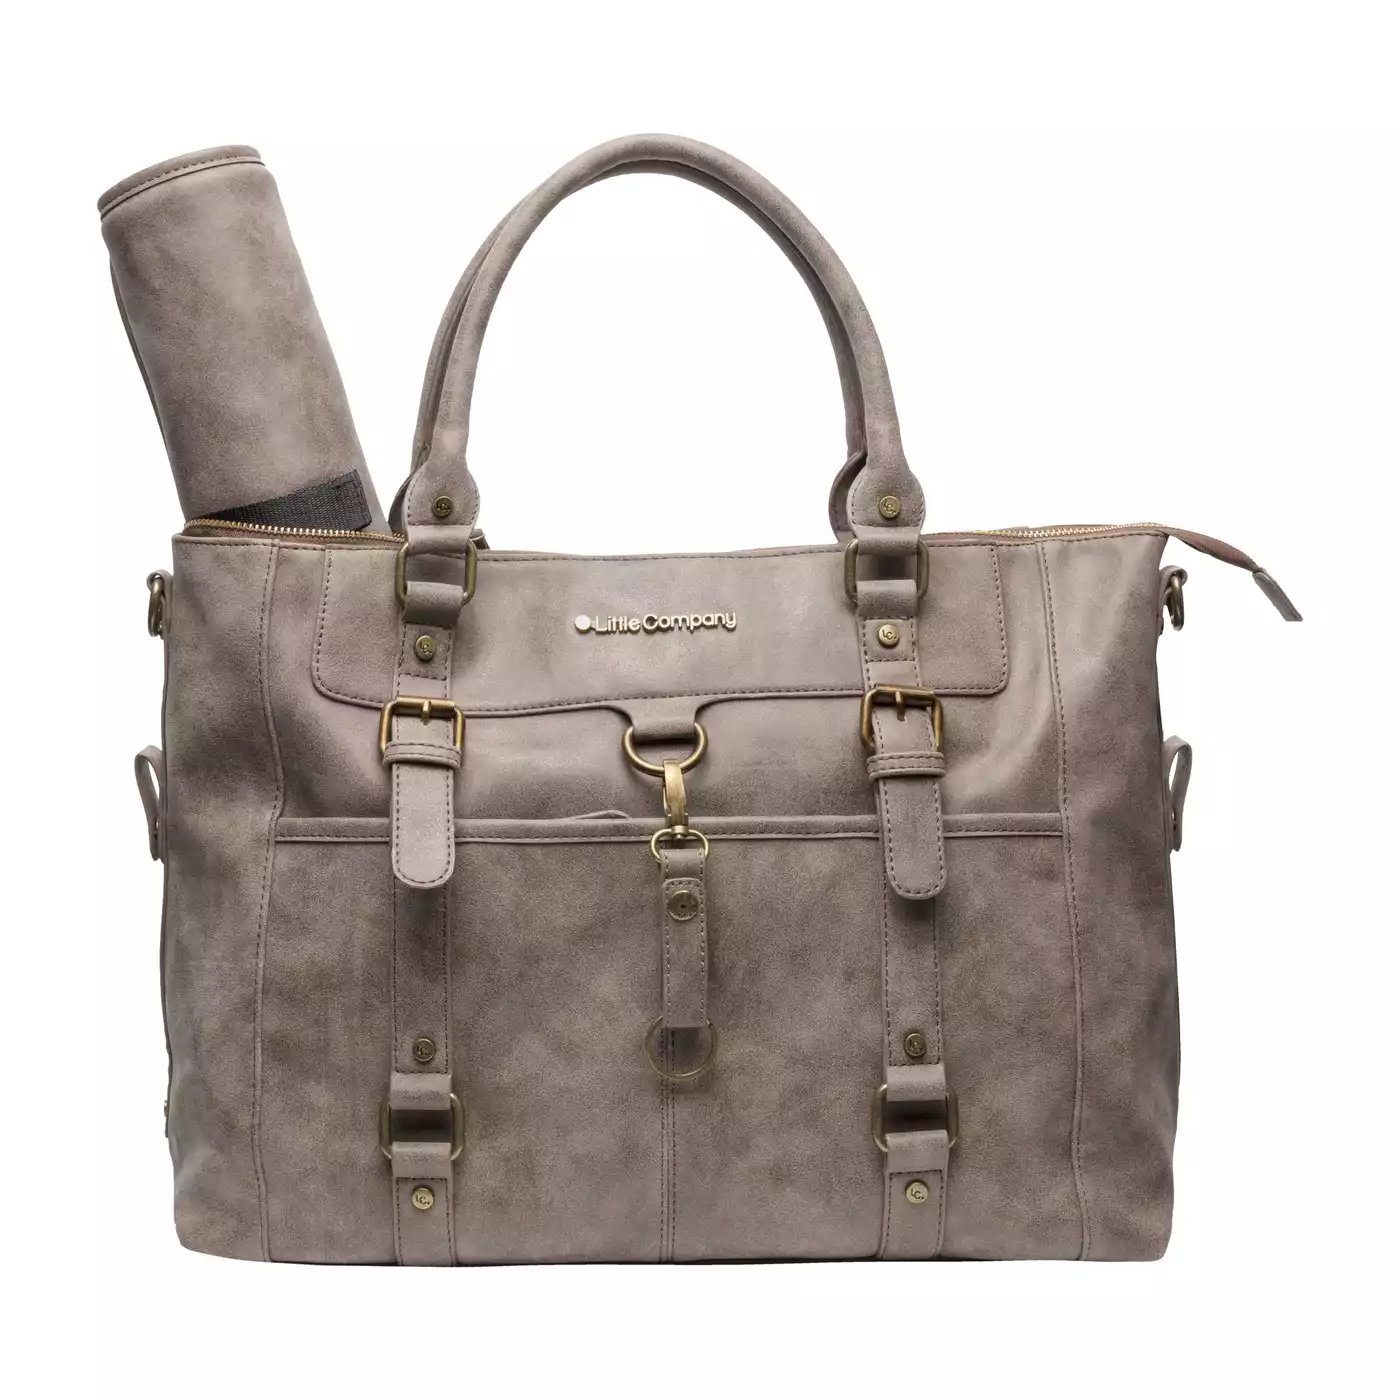 Wickeltasche Helsinki solid taupe Little Company Beige Taupe 2000576181309 6